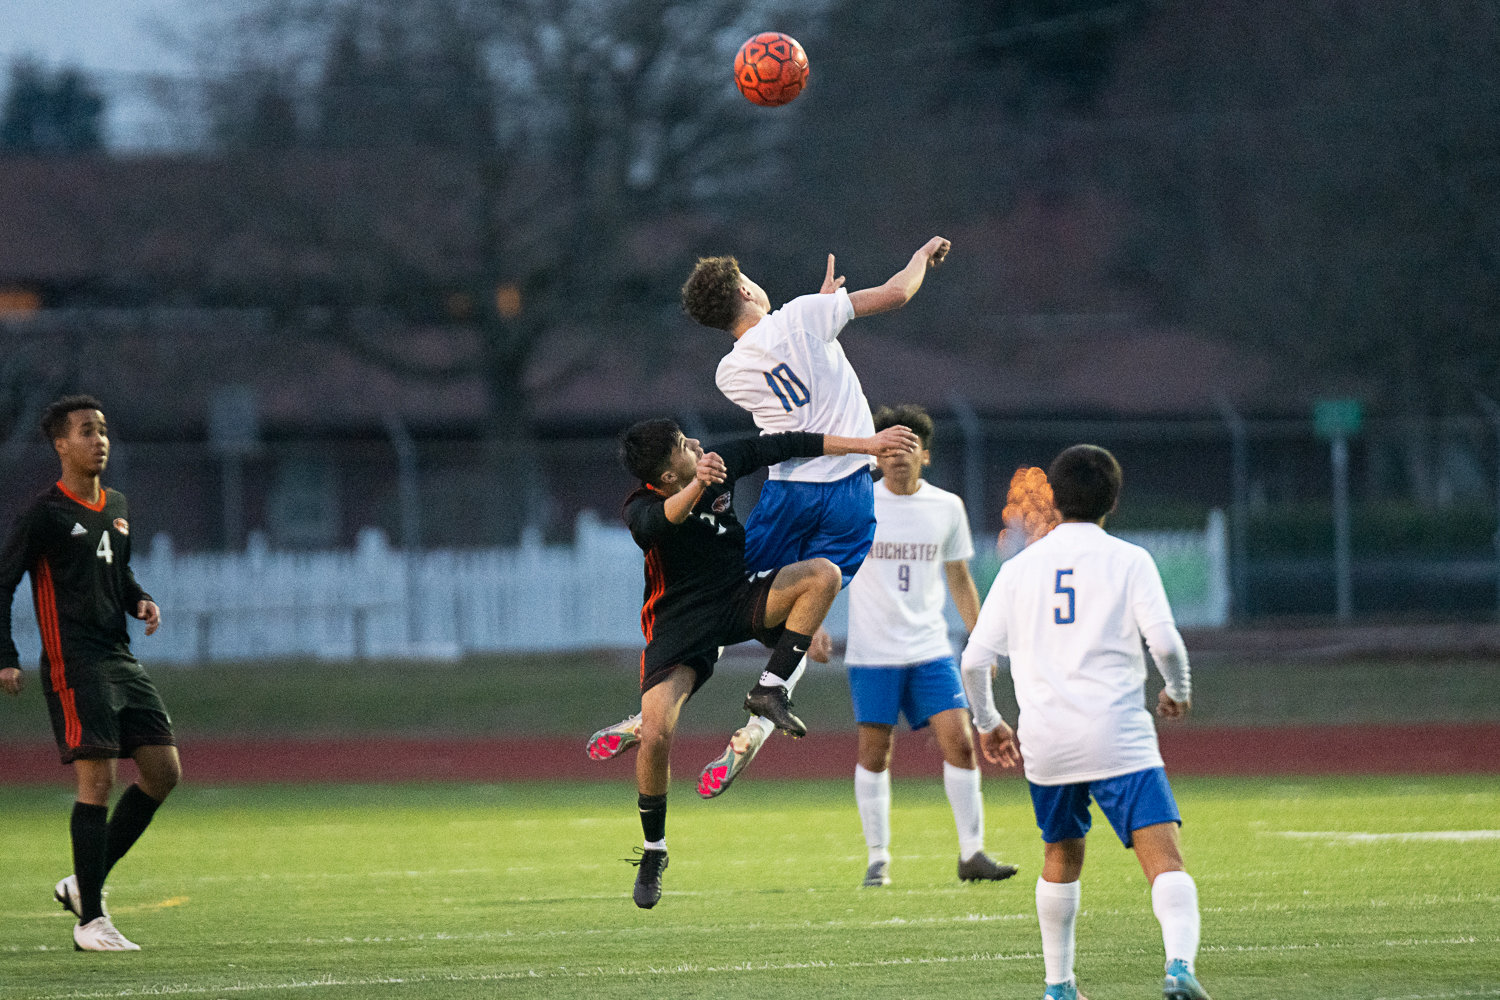 Rochester's Gabriel Fernandez Sales outjumps Centralia's Kilmer Alverto for a header during the first half of the Warriors' match against the Tigers on March 17.